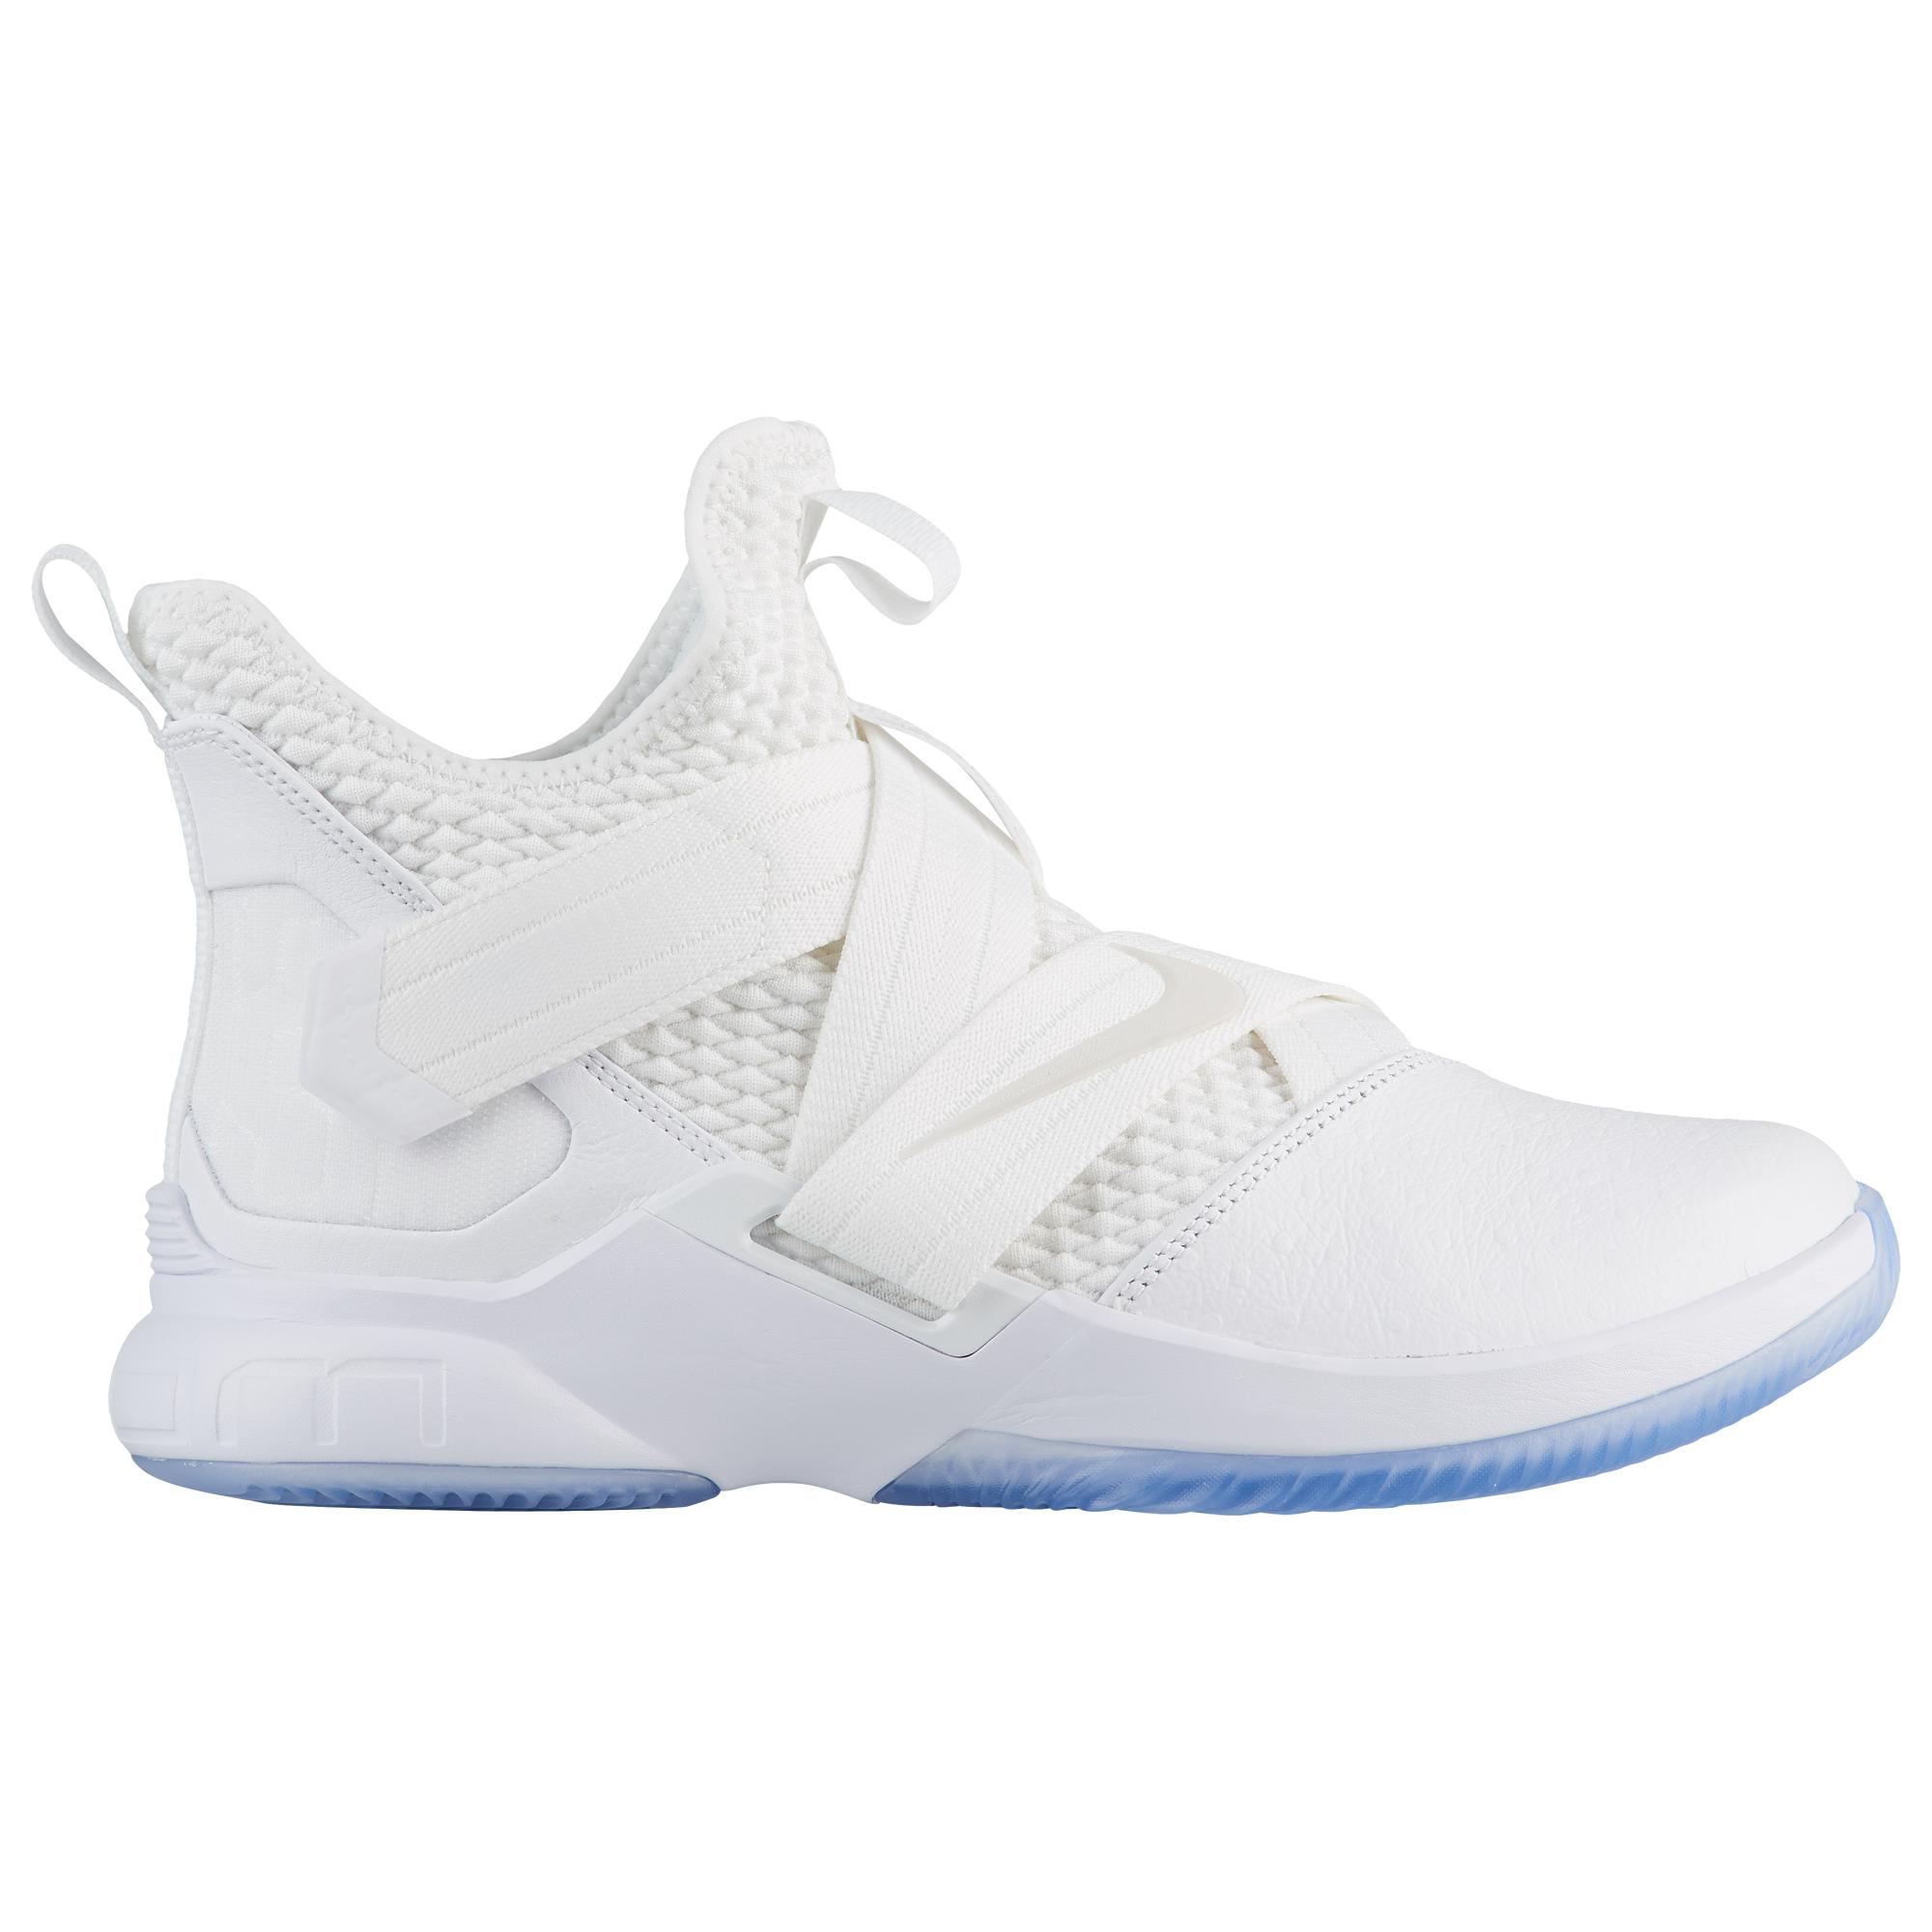 lebron james soldier xii sfg